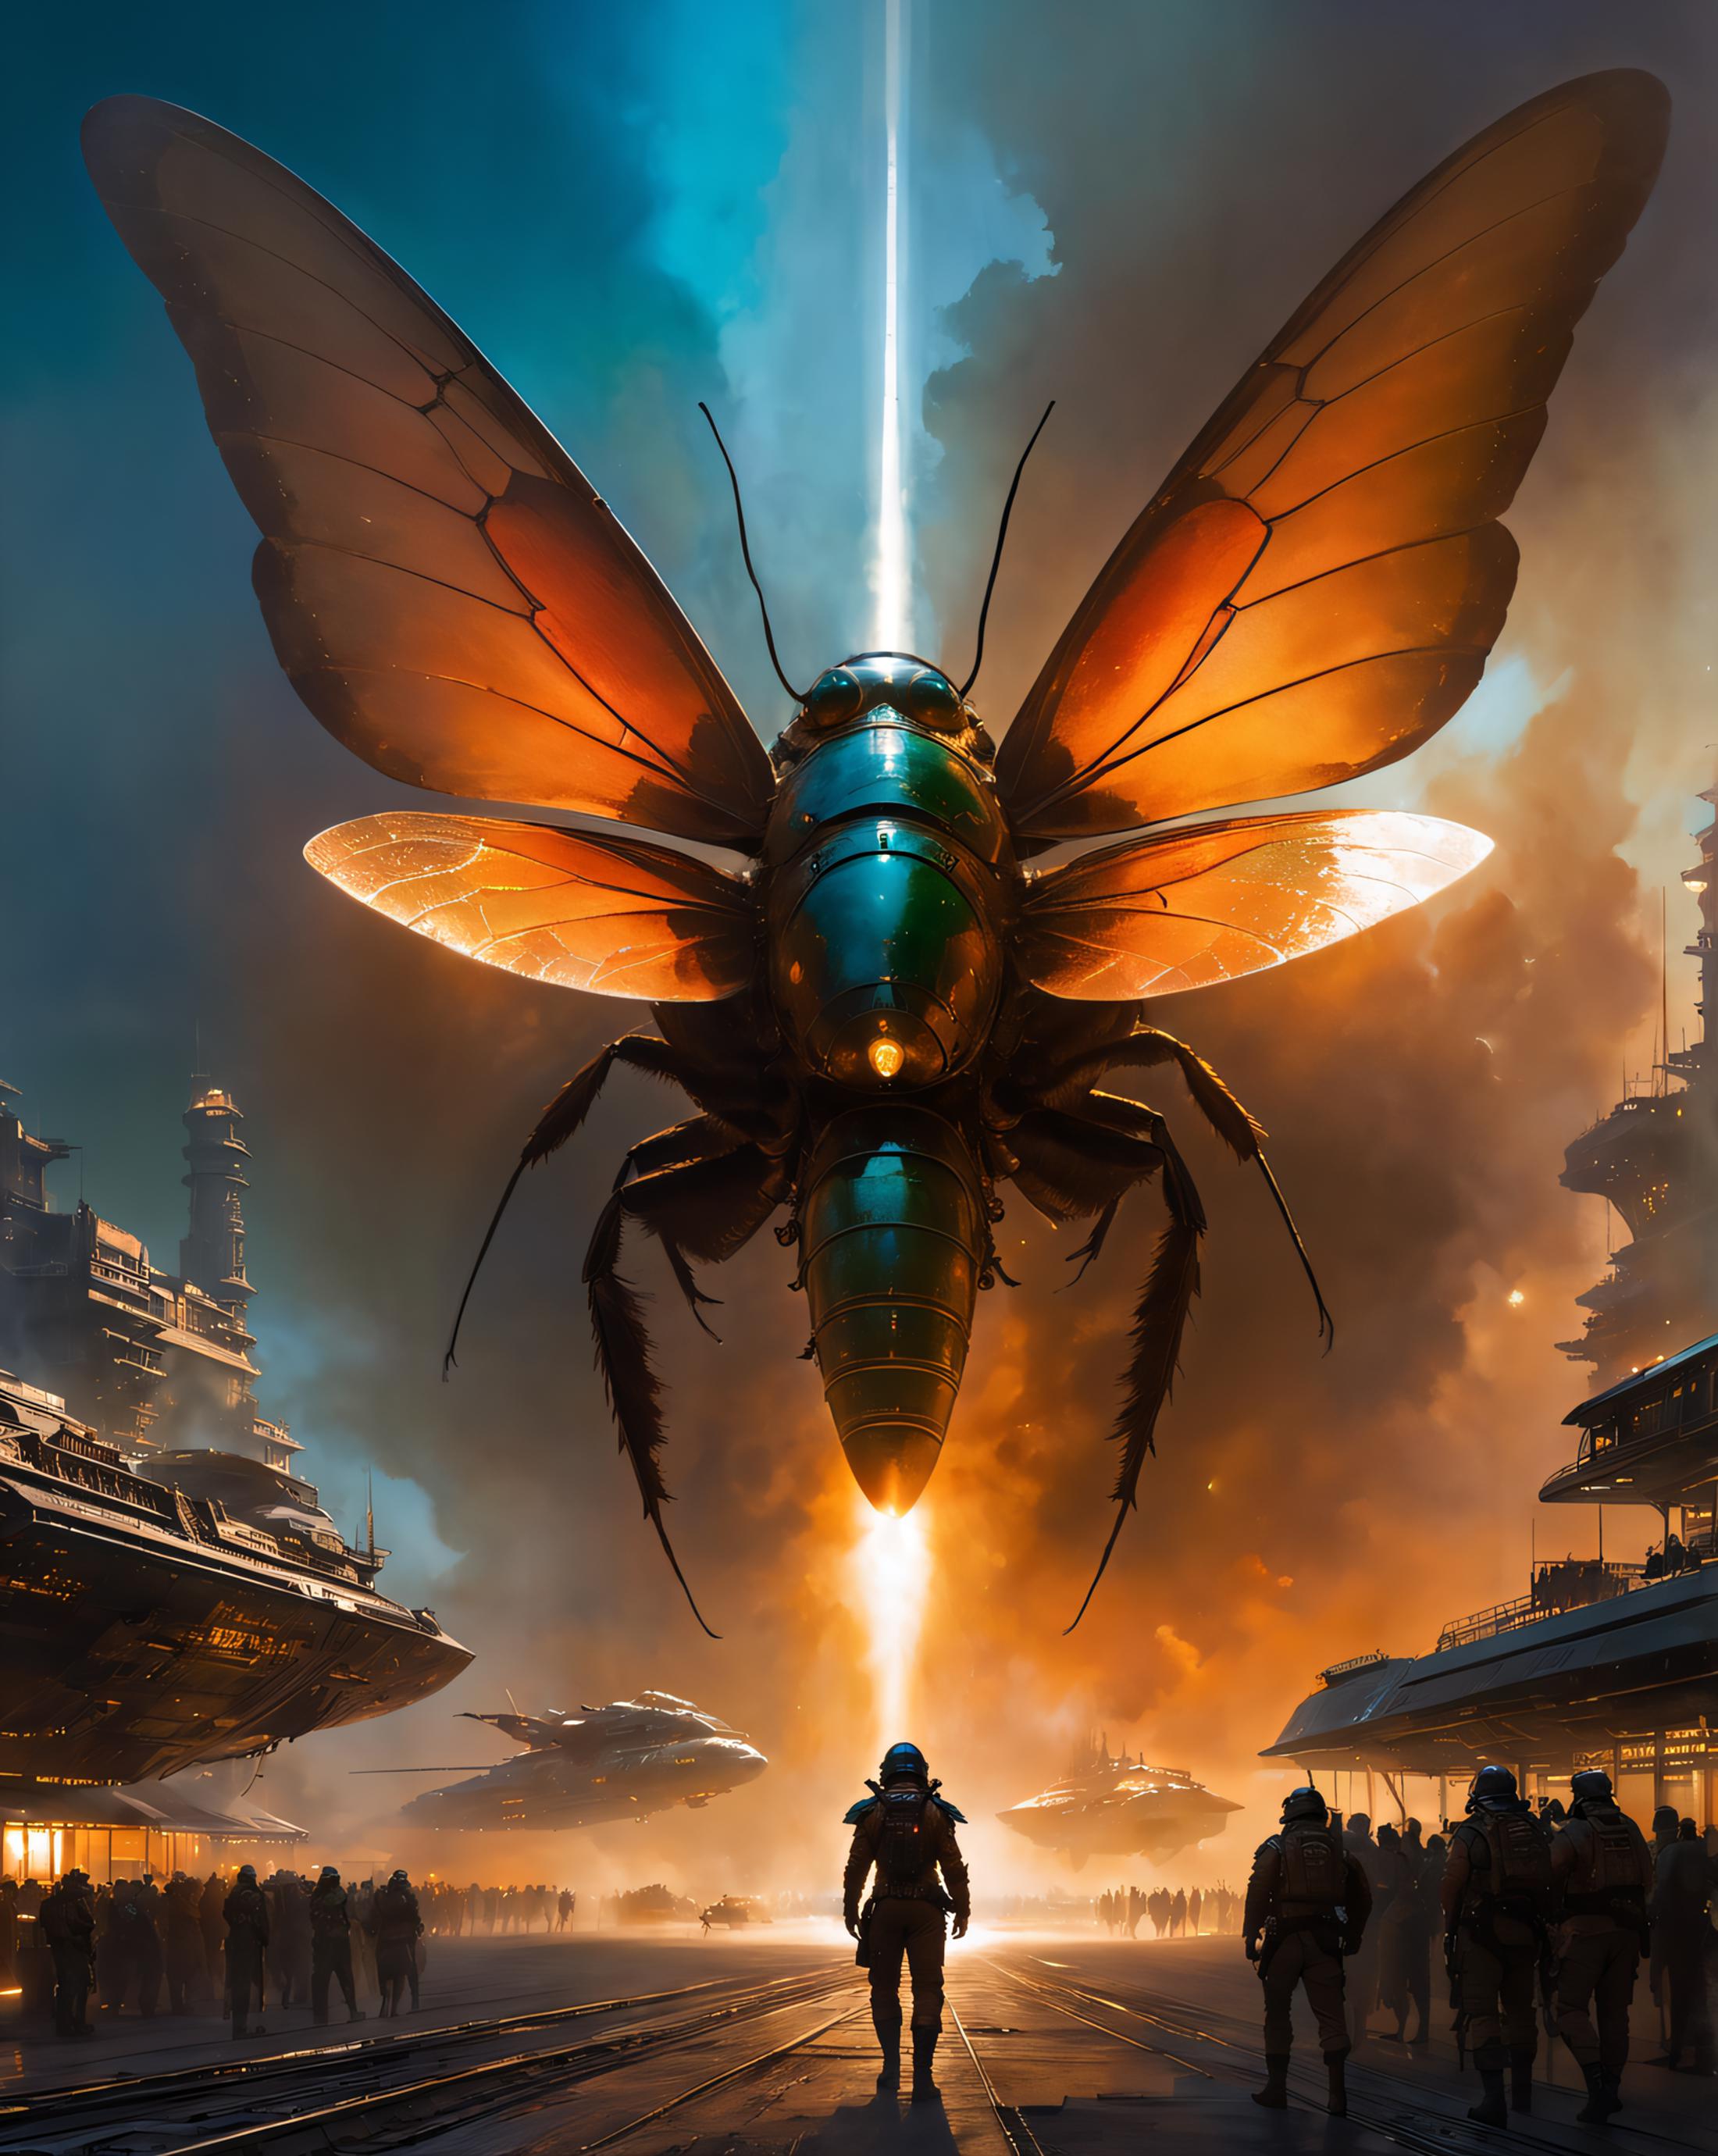 A giant insect-like robot flies over a city, with several people standing below it.